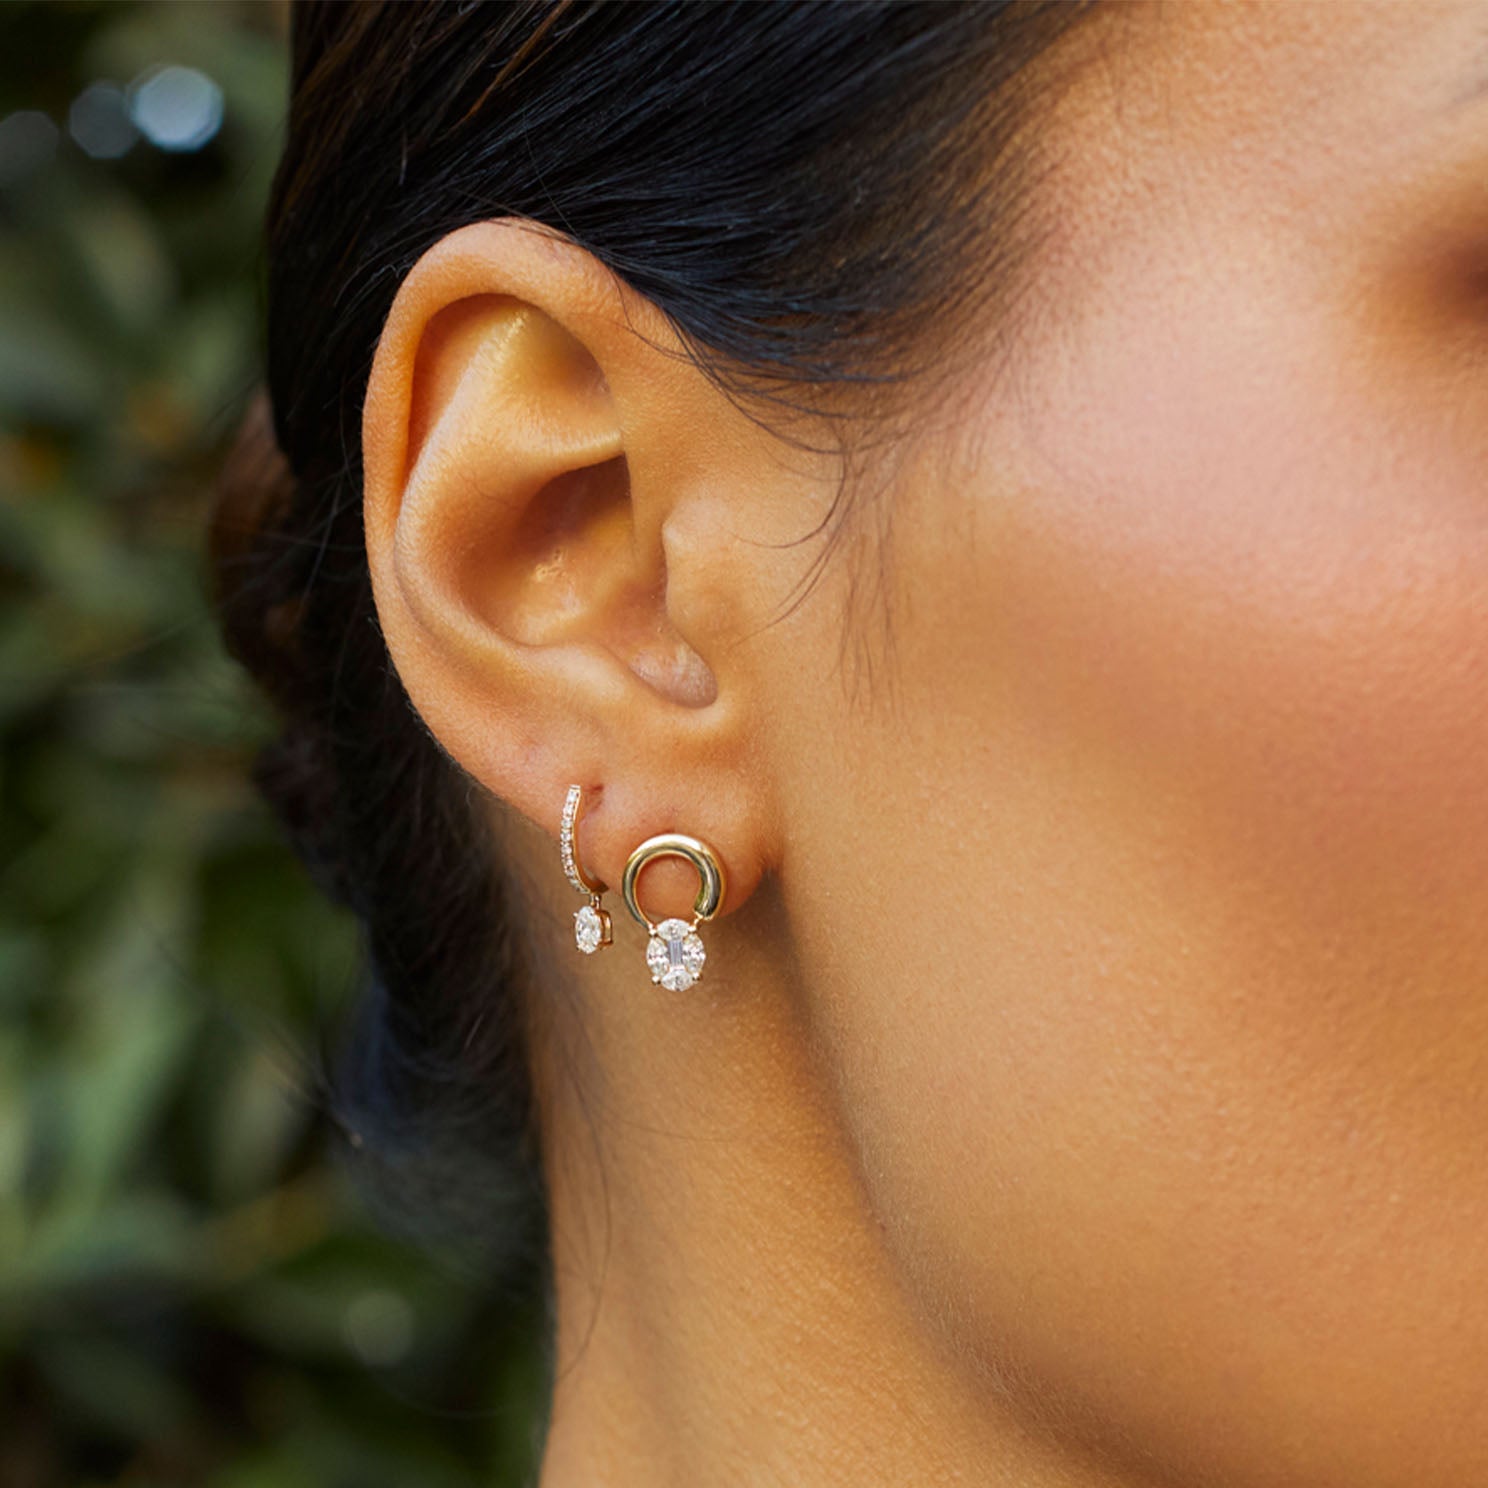 The Iris Illusion Stud Earrings in 14k yellow gold styled on first earring hole on ear lobe of model